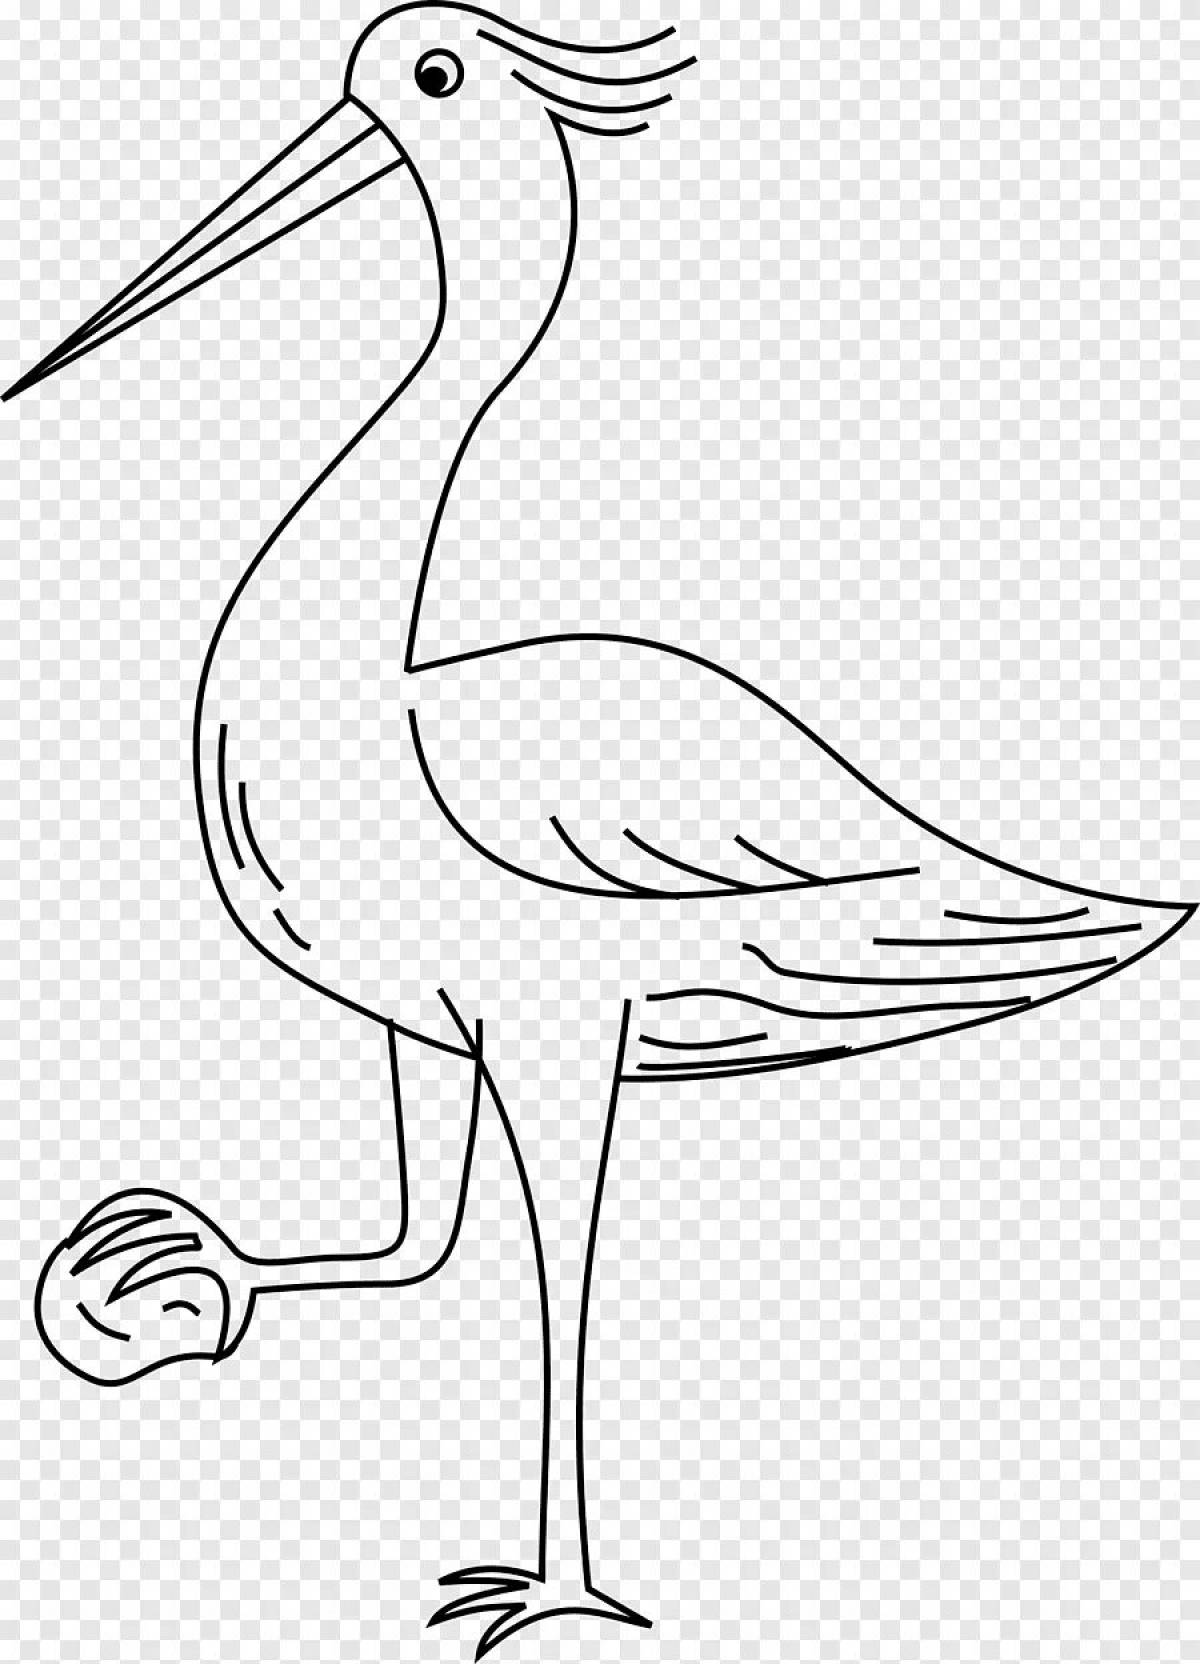 Animated heron coloring page for kids